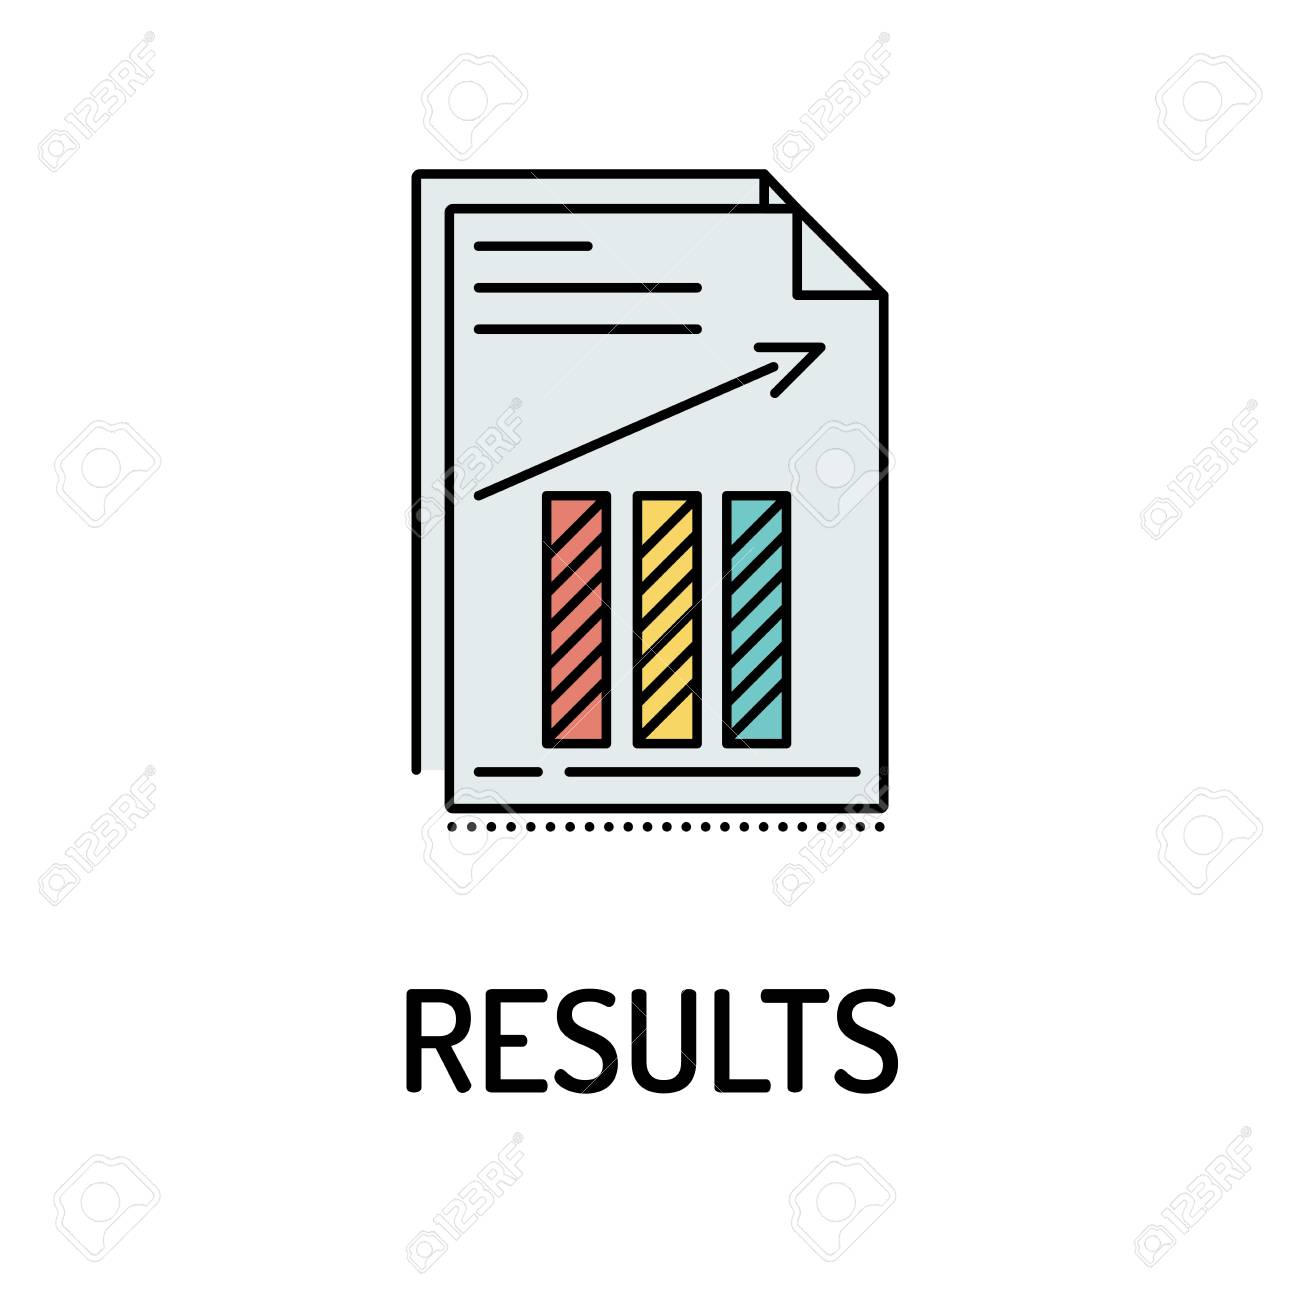 RESULTS Line Icon